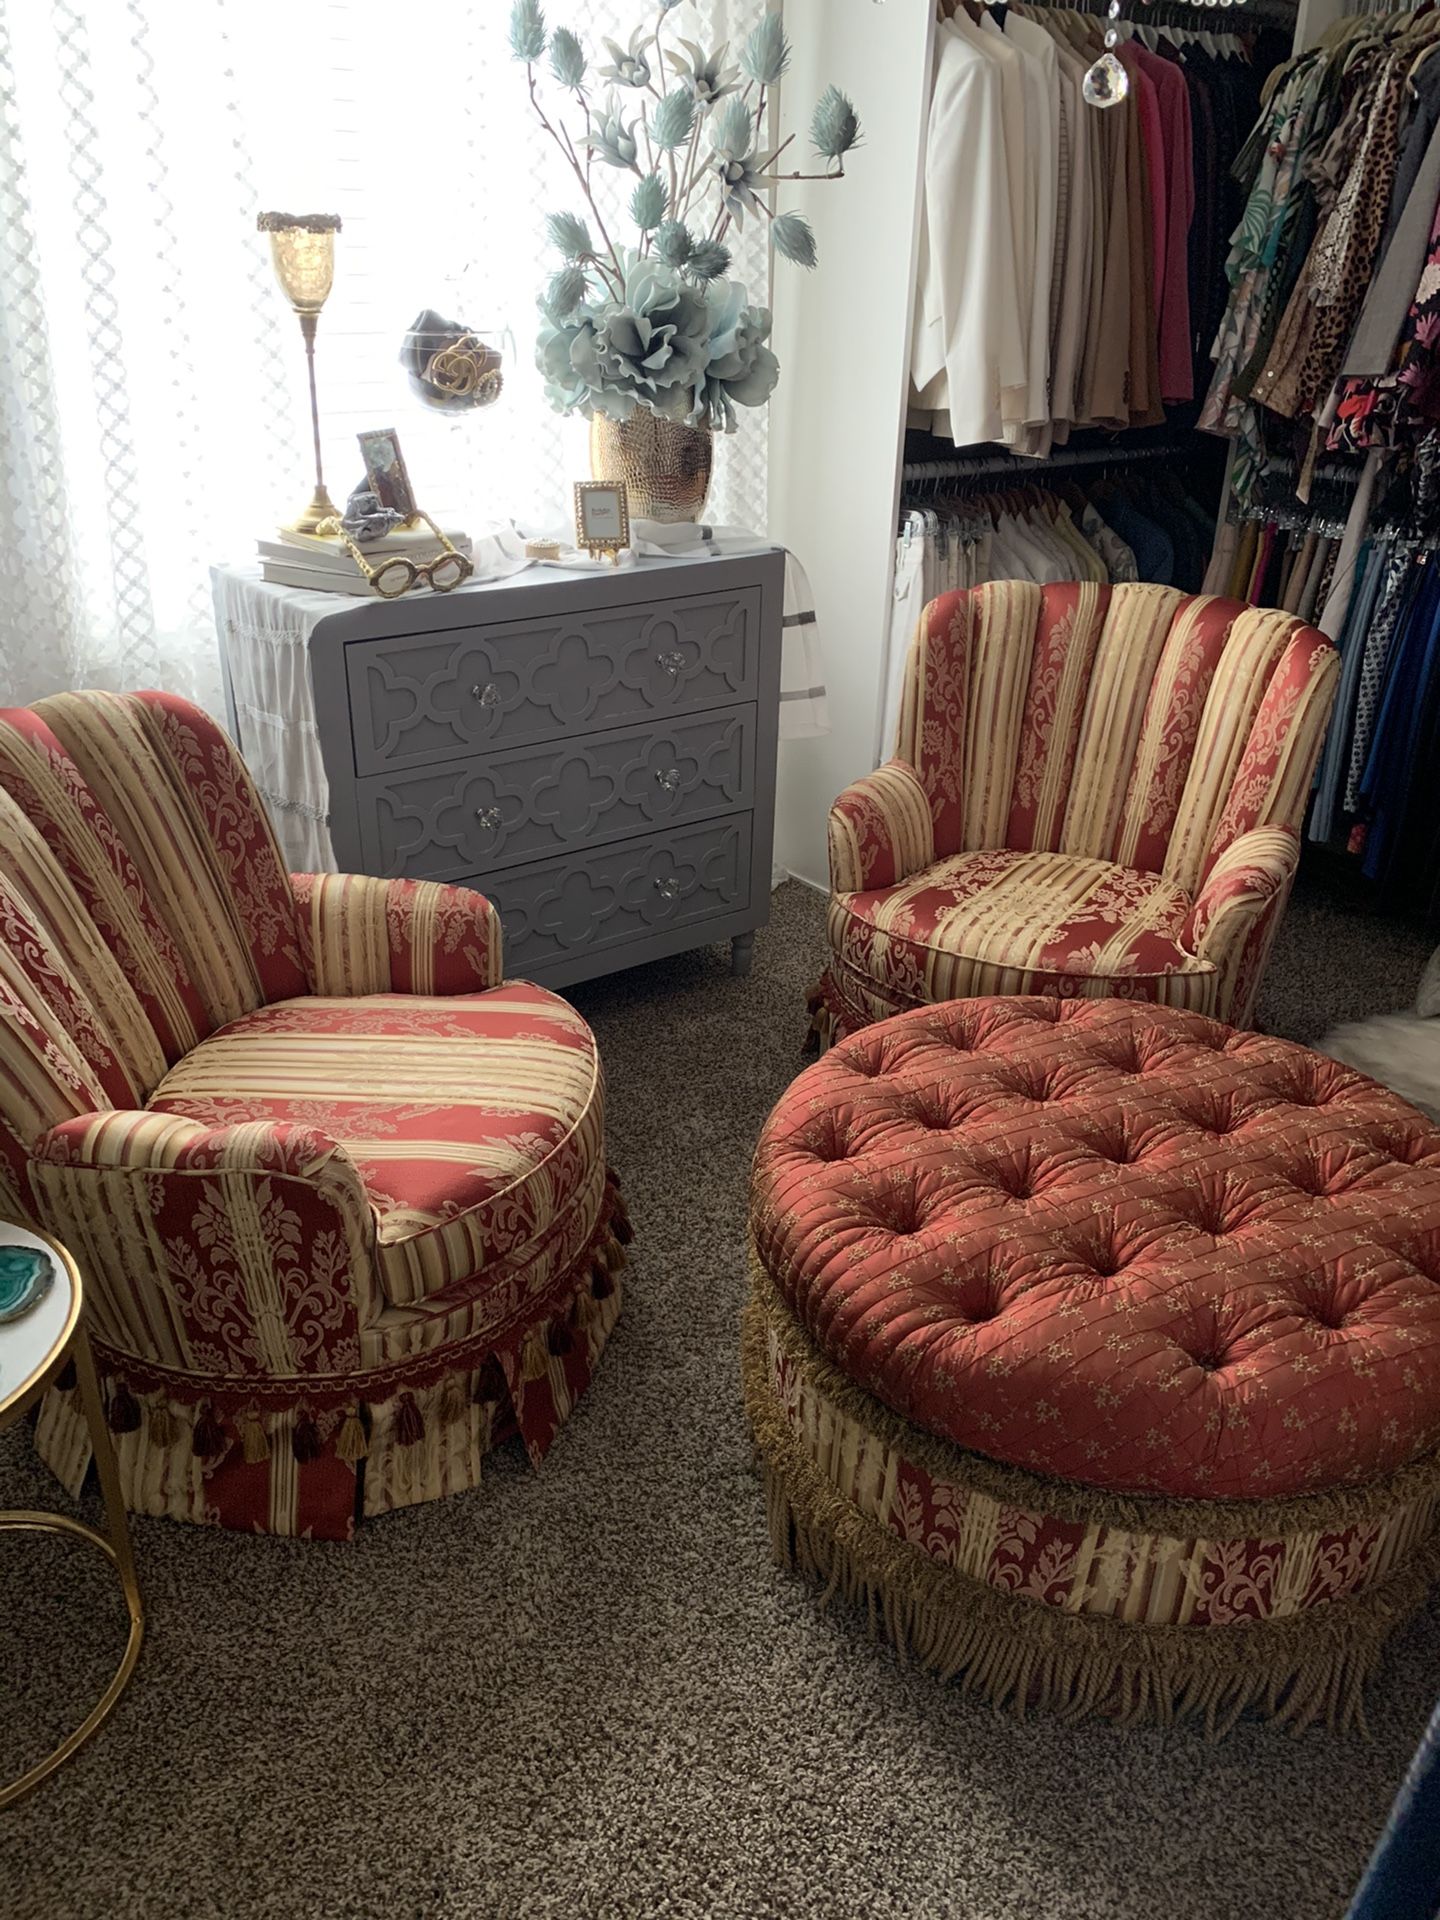 2 Chairs both swivel with 1 Ottoman